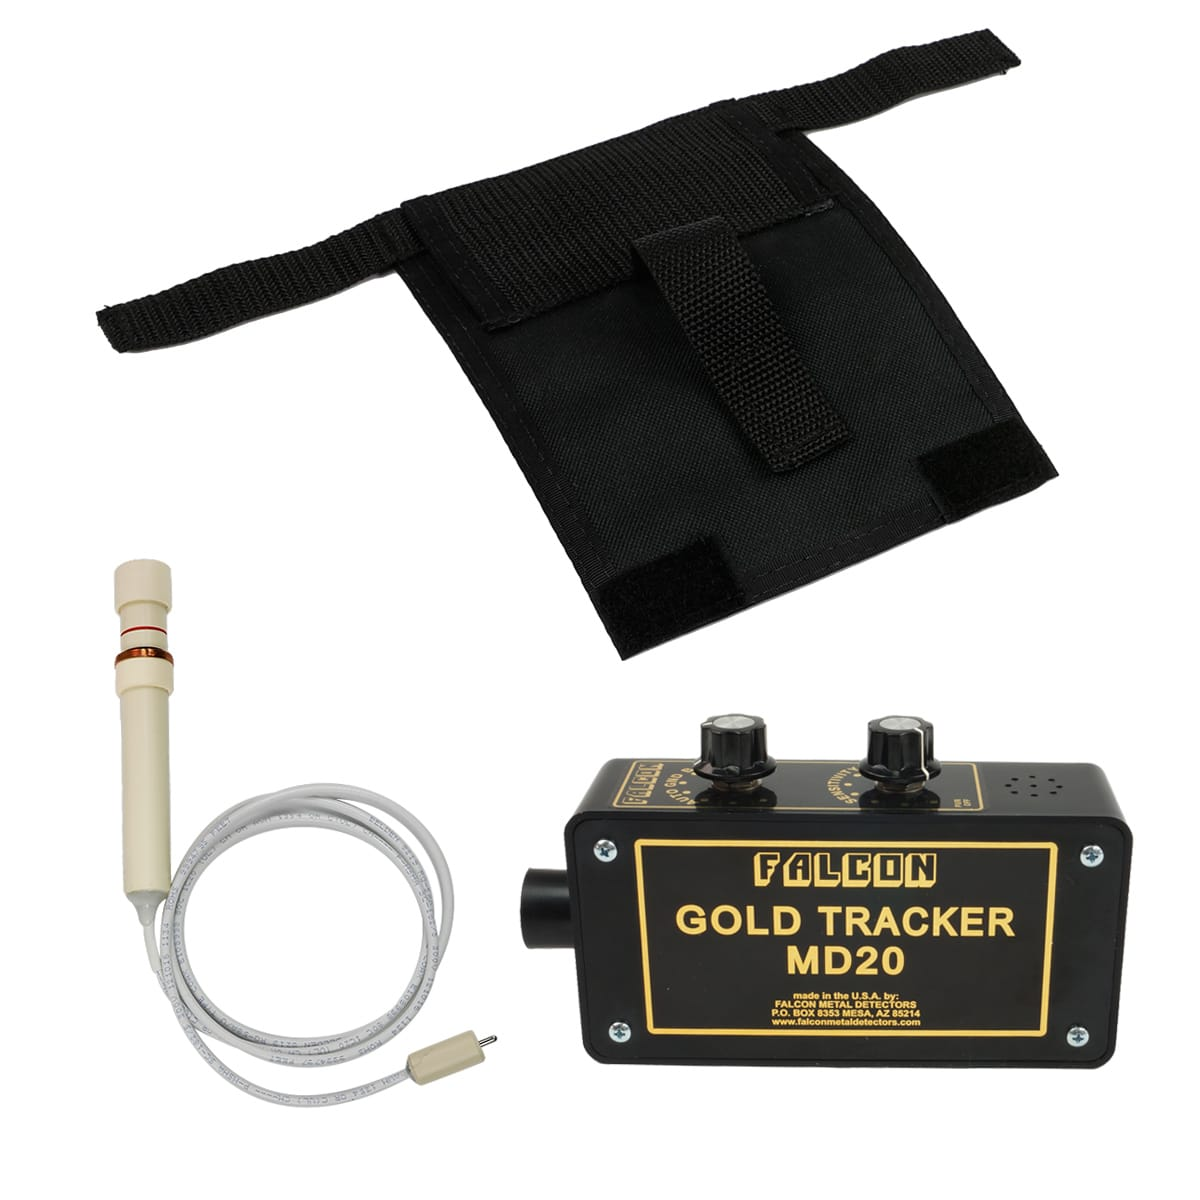 Falcon Gold Tracker MD20 Metal Detector with 3-Piece Handle with Foam Grip & Holster